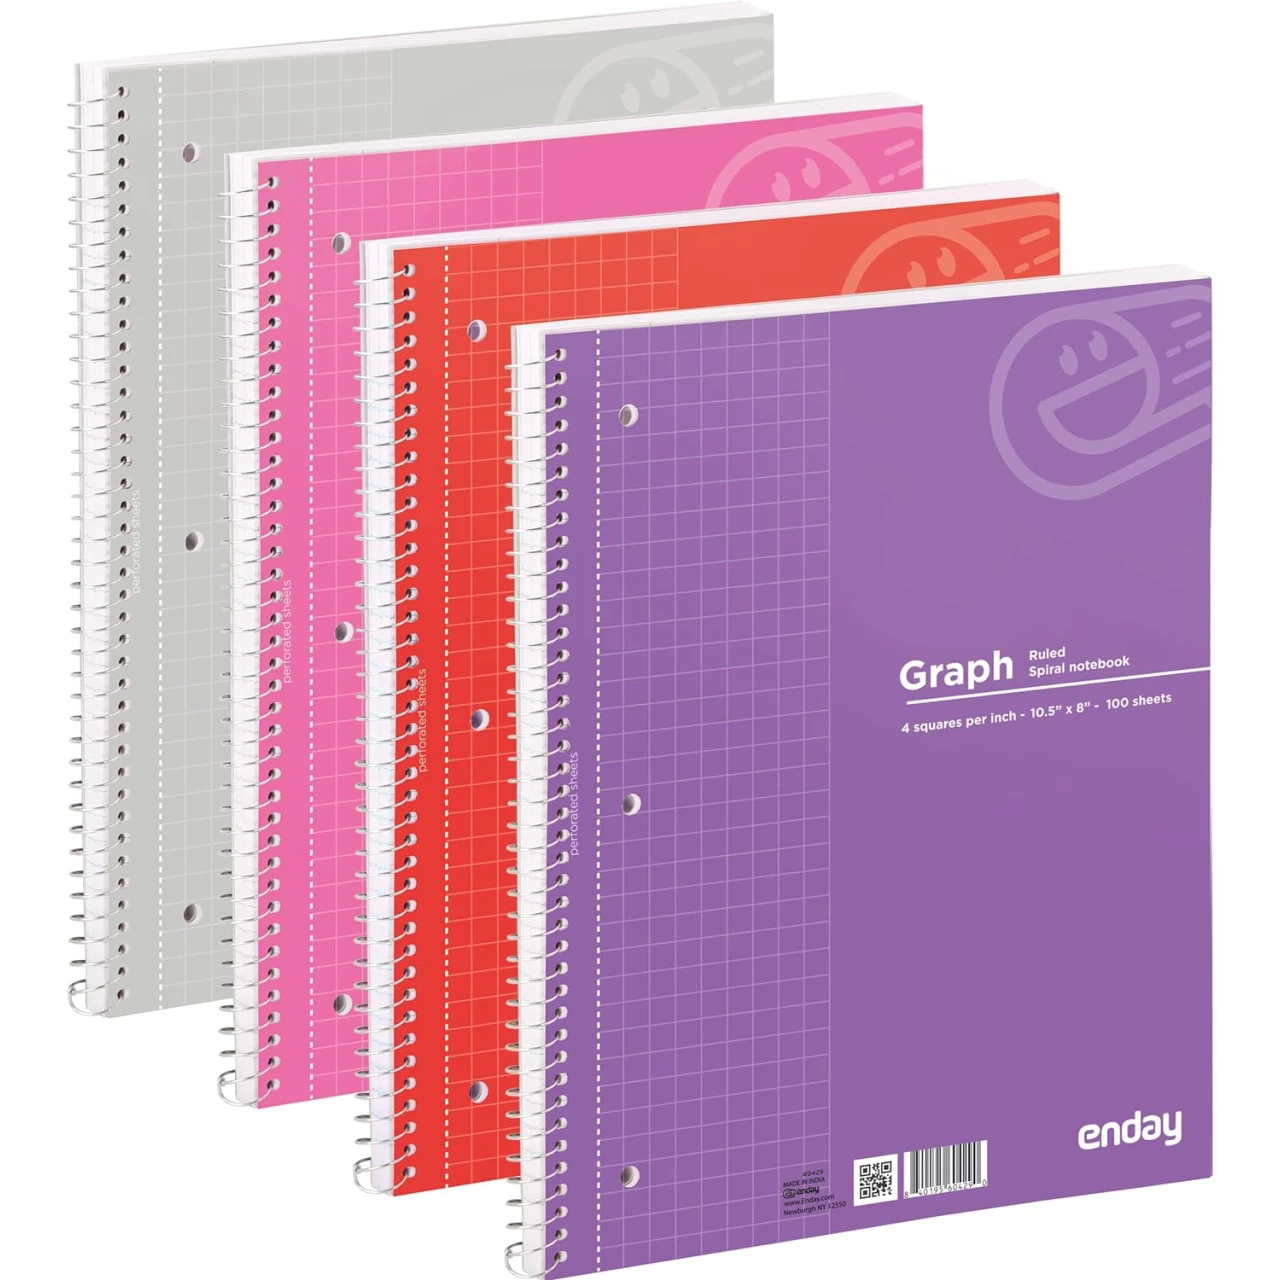 Emraw Graph Paper Notebook Quad Ruled Spiral Grid Notebook PACK Of 4 White Paper 100 Sheets Assorted Colors Wire Bound Graphing Books